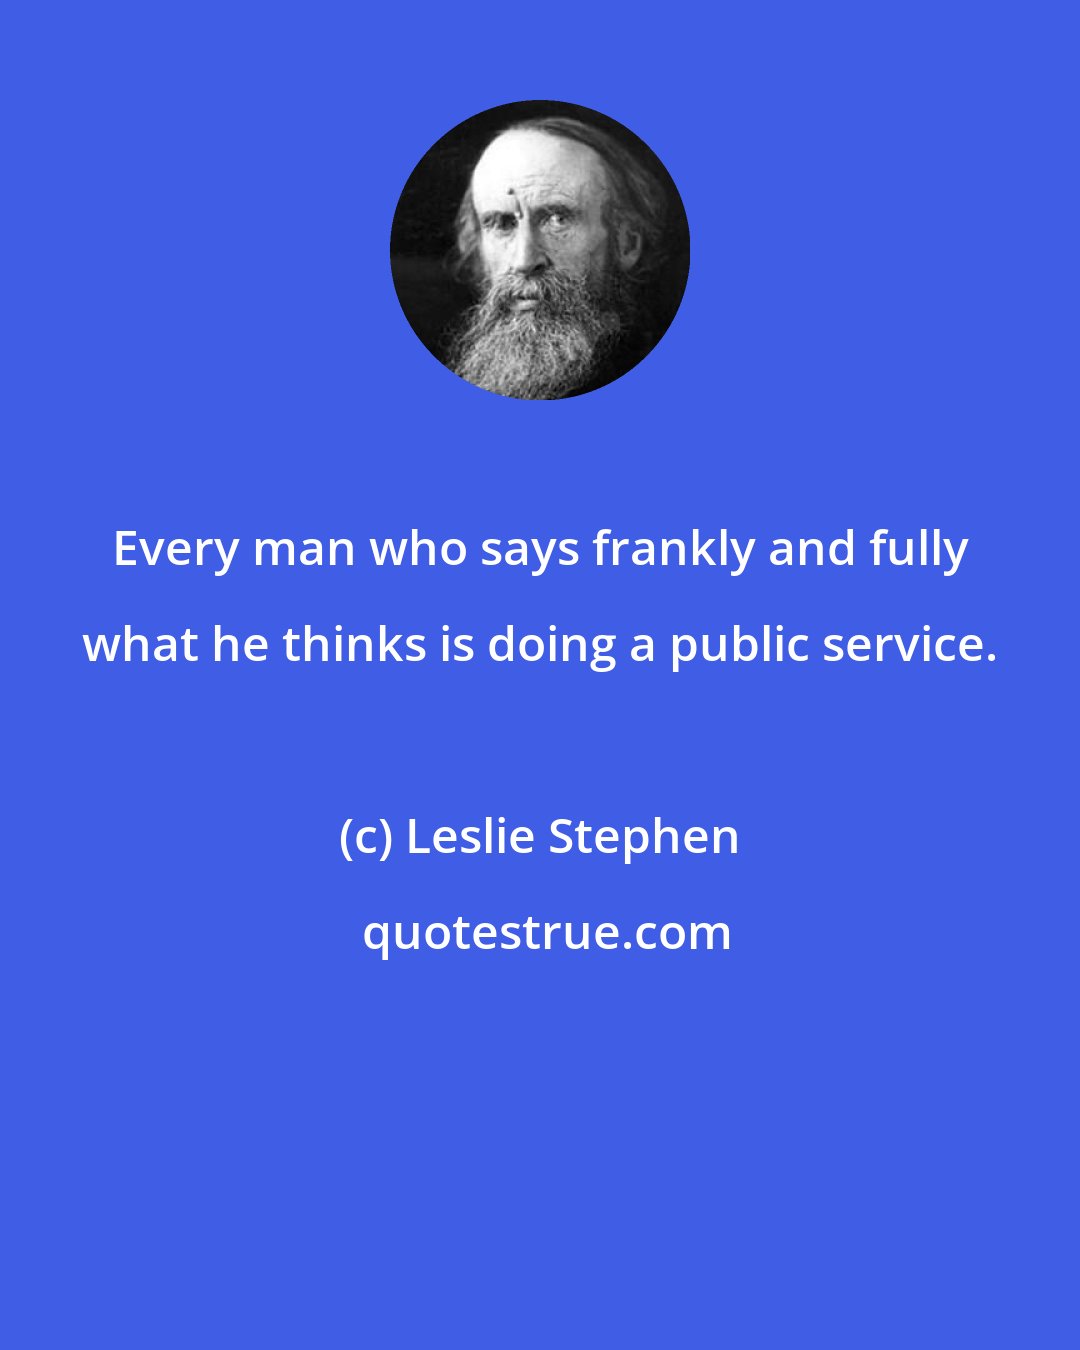 Leslie Stephen: Every man who says frankly and fully what he thinks is doing a public service.